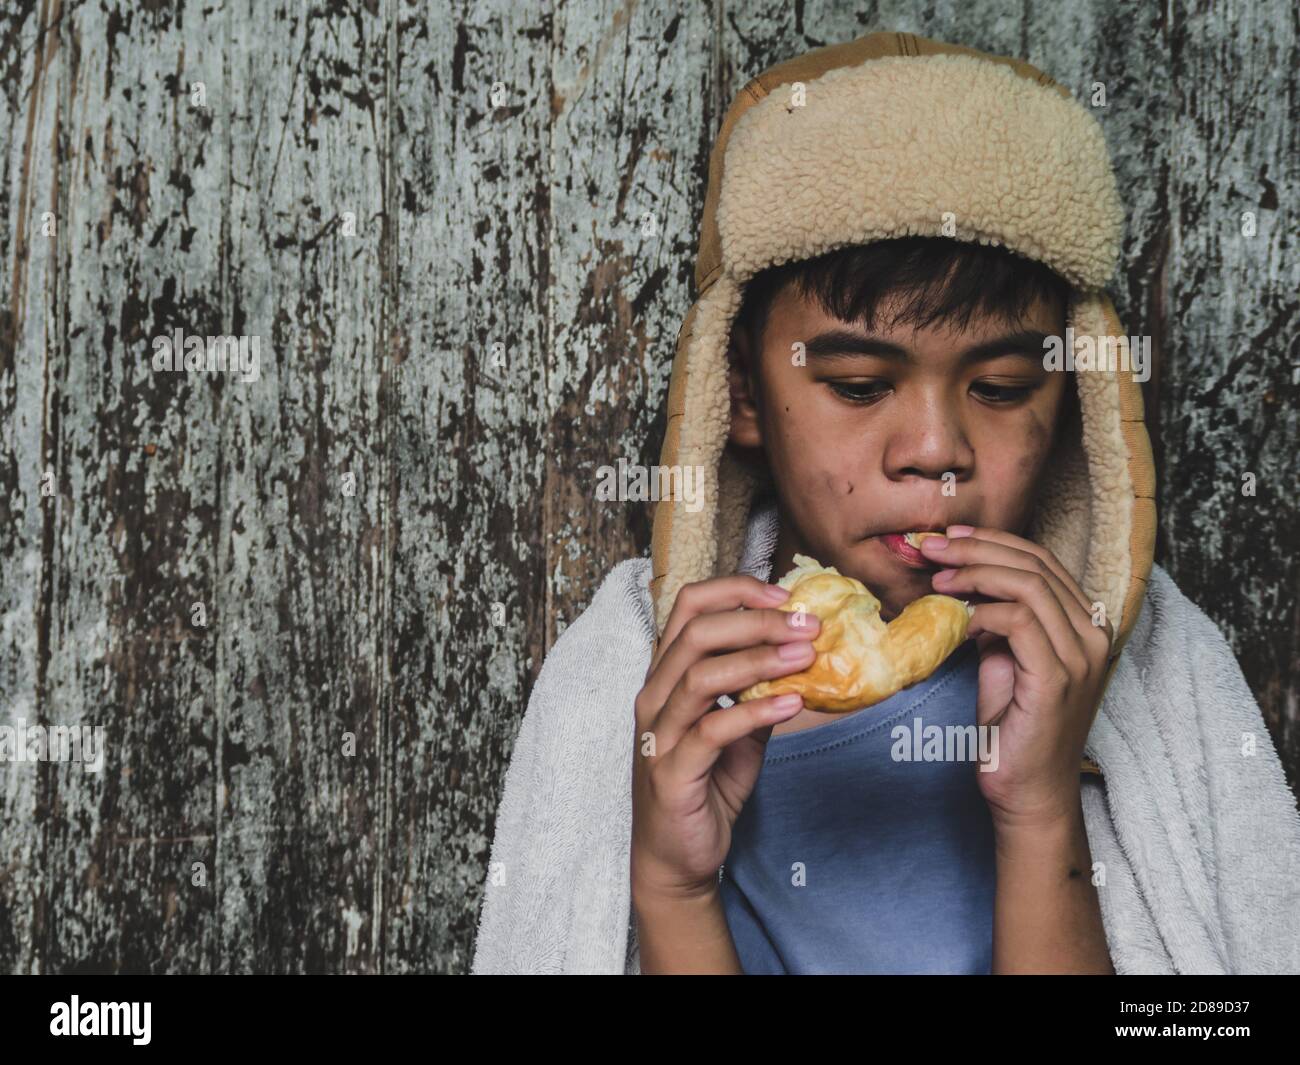 Hungry child eating bread that asking help for food donation from the people on street at the city. Unidentified homeless child begging on street. She Stock Photo